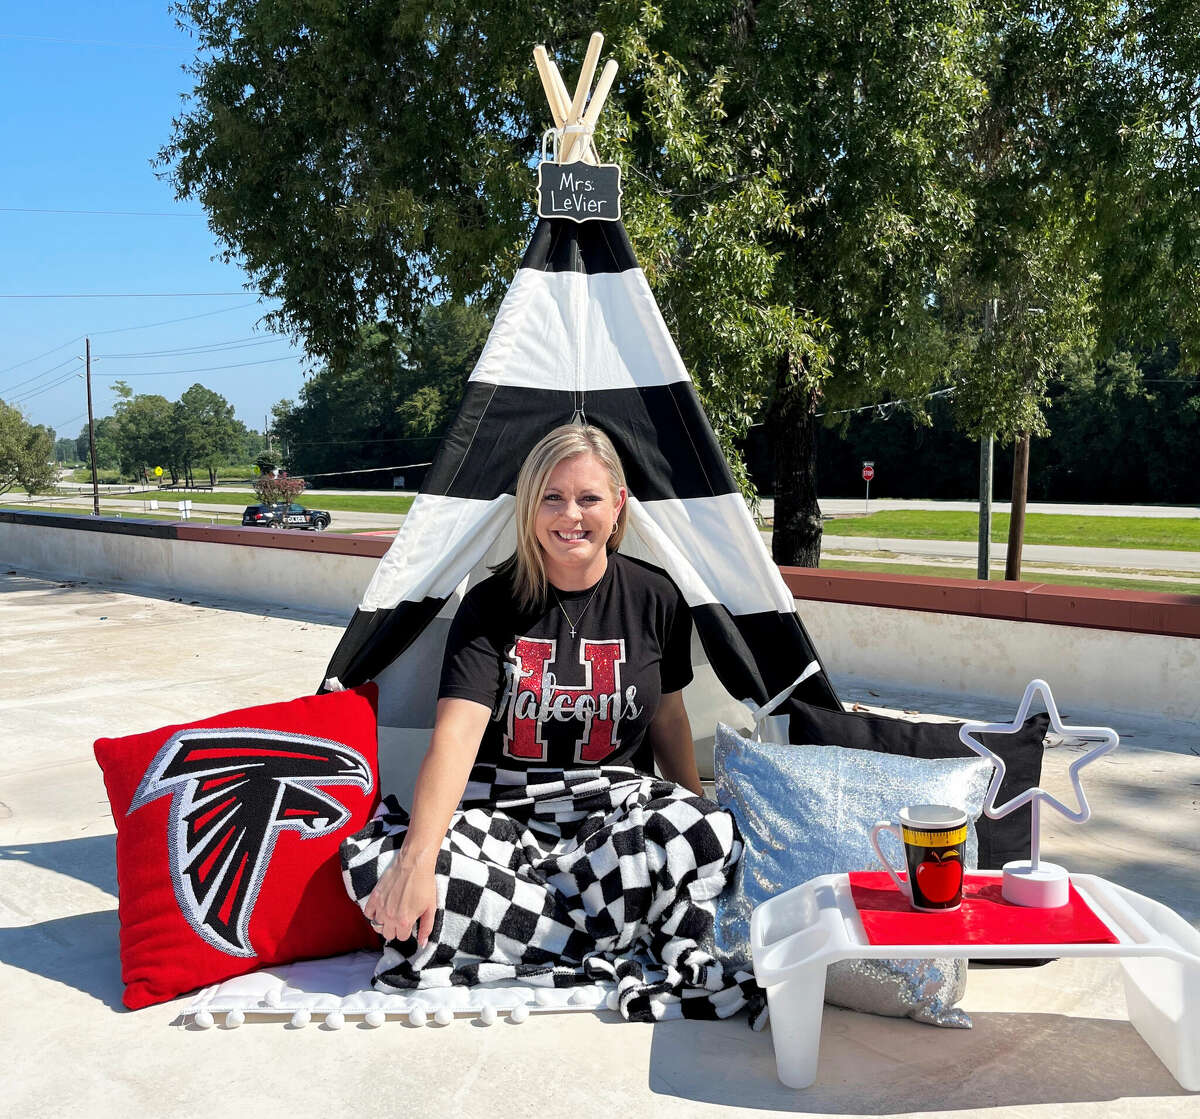 Huffman Elementary principal Angie LeVier was set to spend the night on the rooftop after losing a bet with her students. She took with her a tent, pillows, snacks, flashlight, blankets, lantern, phone and laptop to work while she enjoyed a completely different view.